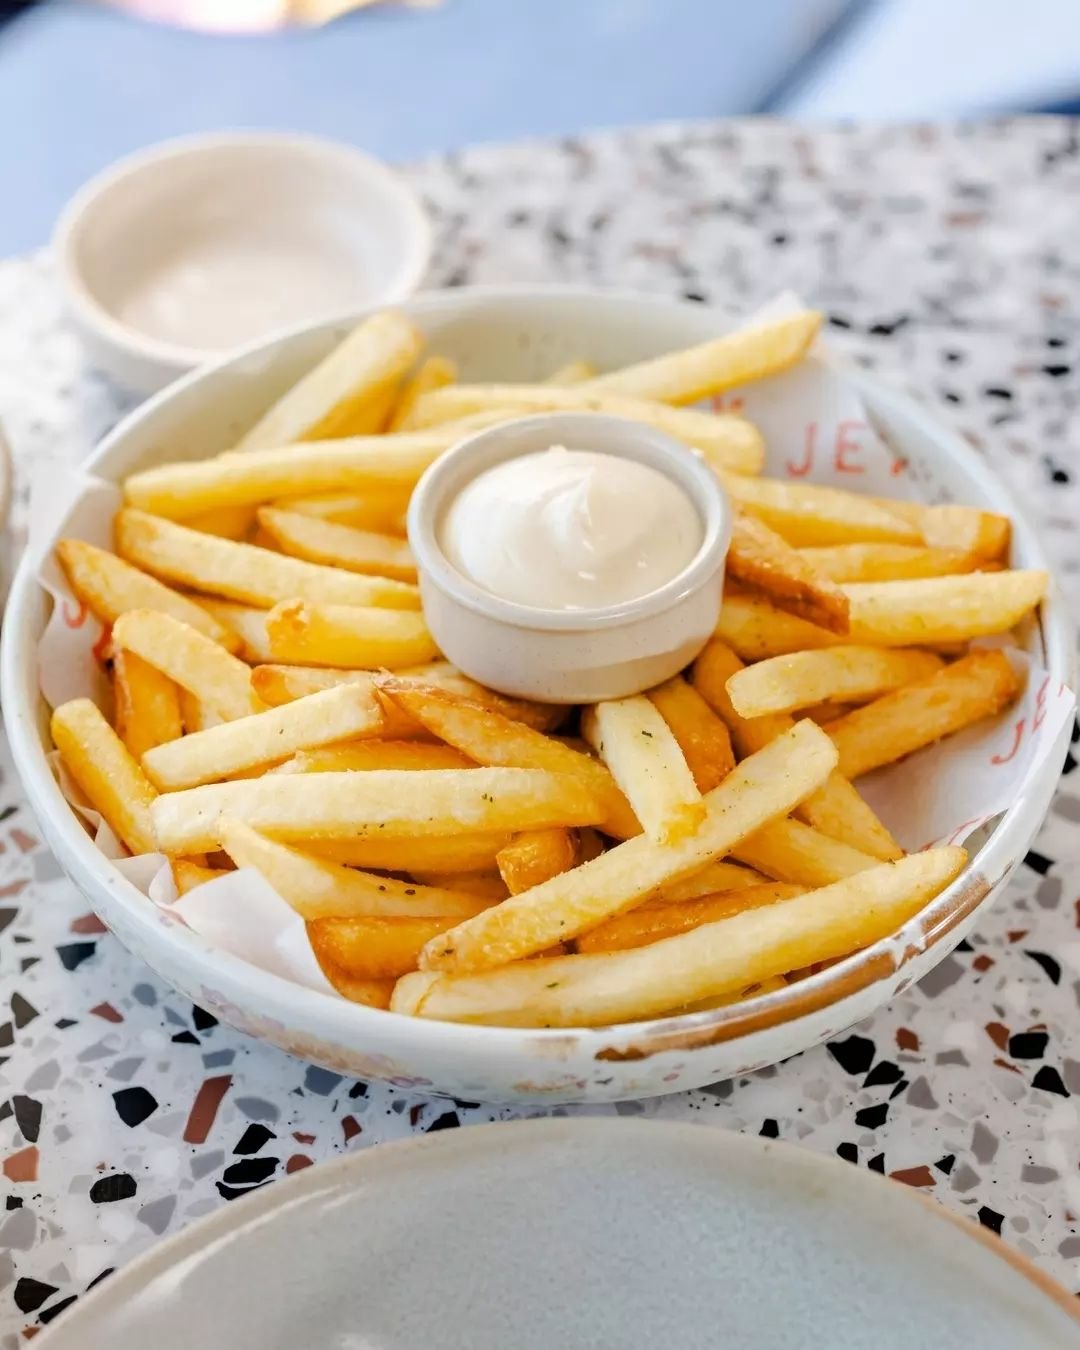 Can't go wrong with a big bowl of chips and aioli!&nbsp;

~ Open Wednesday to Saturday from 11.30am
~ Sunday from 10am&nbsp;
~ Link in bio to book